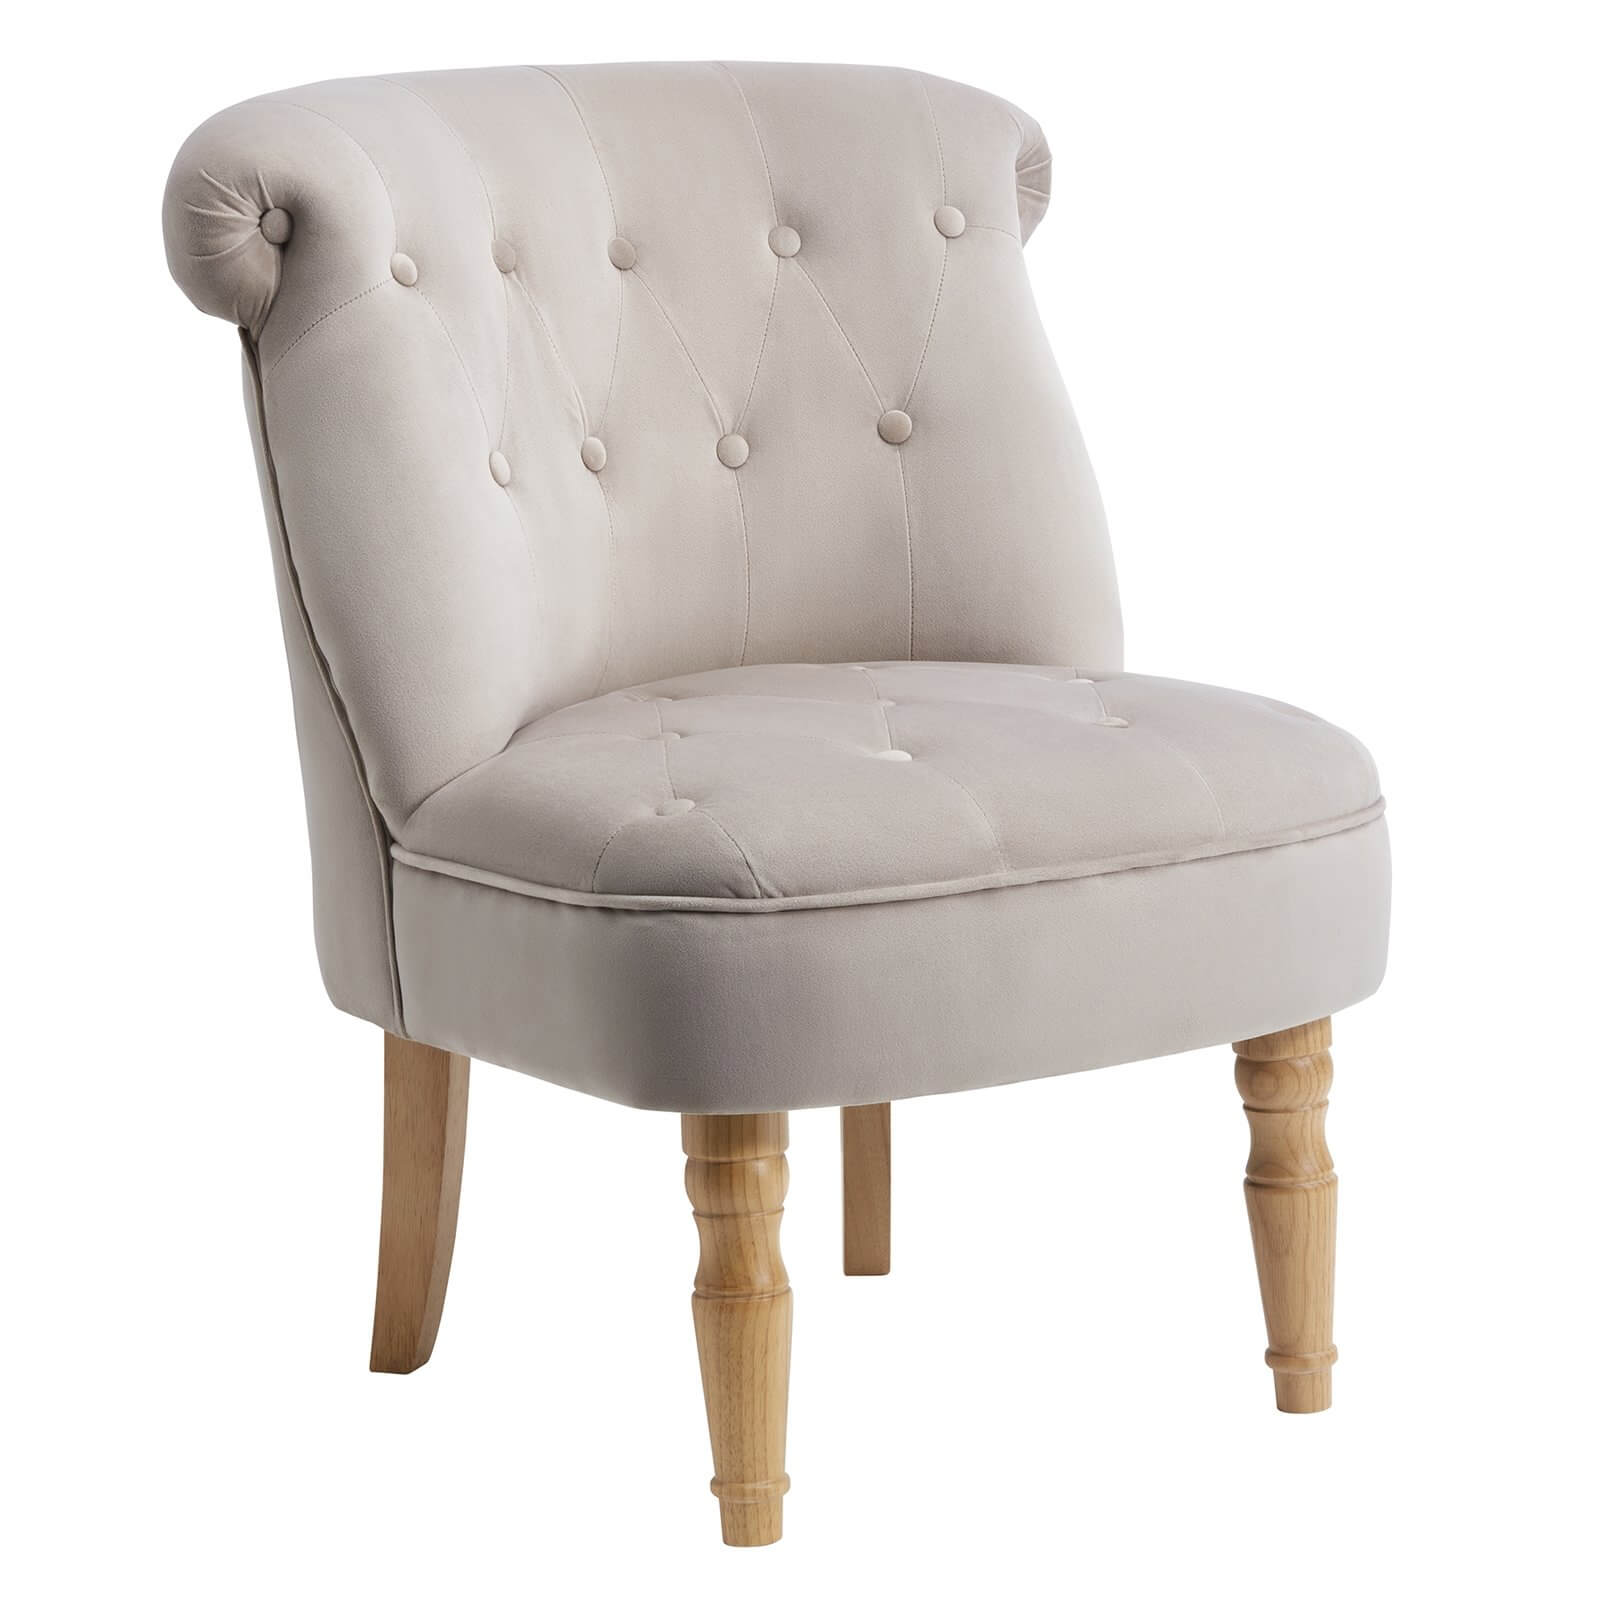 Emily Occasional Chair - Mink